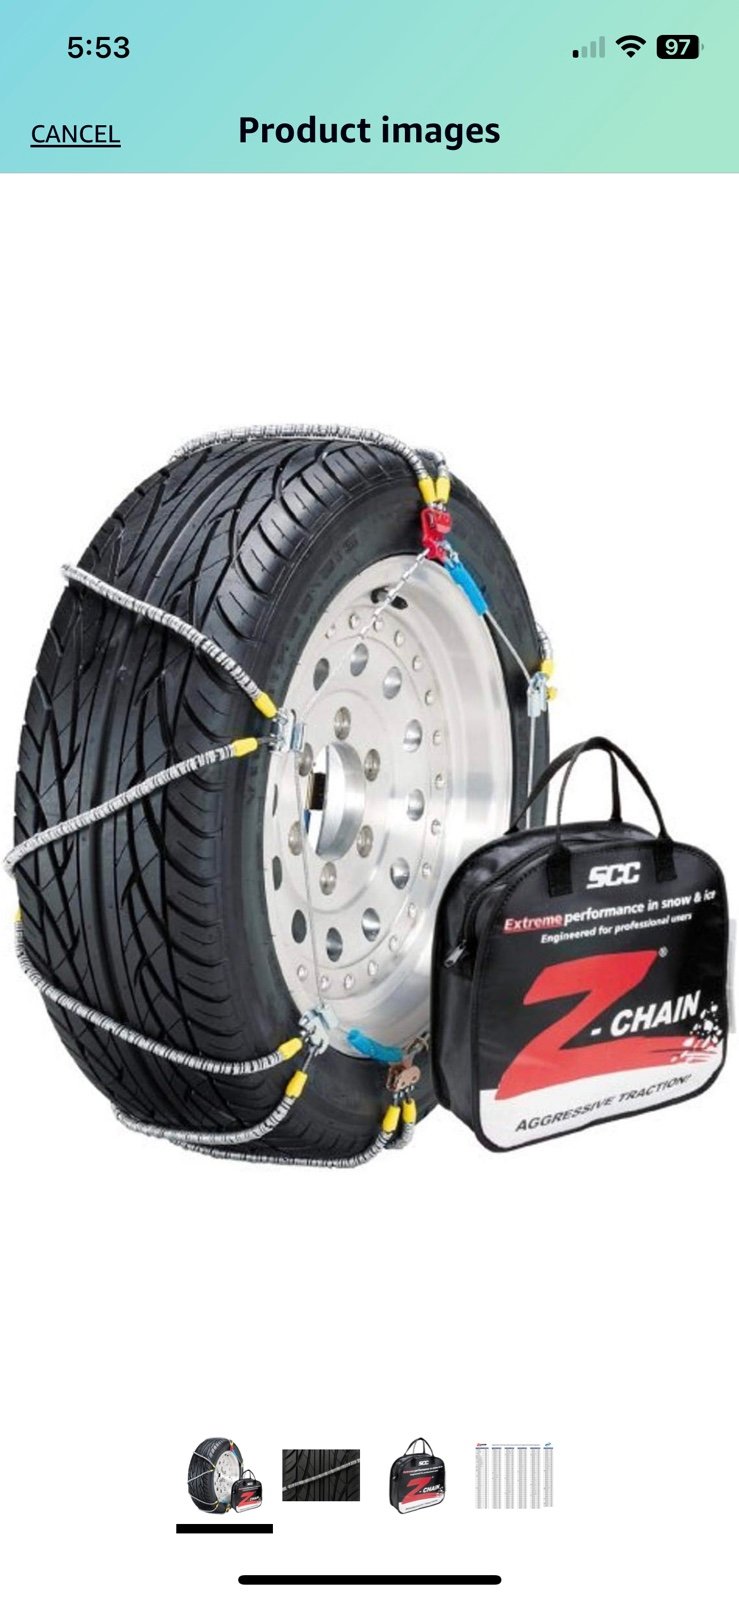 Security Chain Company Z-583 Z-Chain Extreme Performance Cable Tire Traction Cha g9GbwFYXm